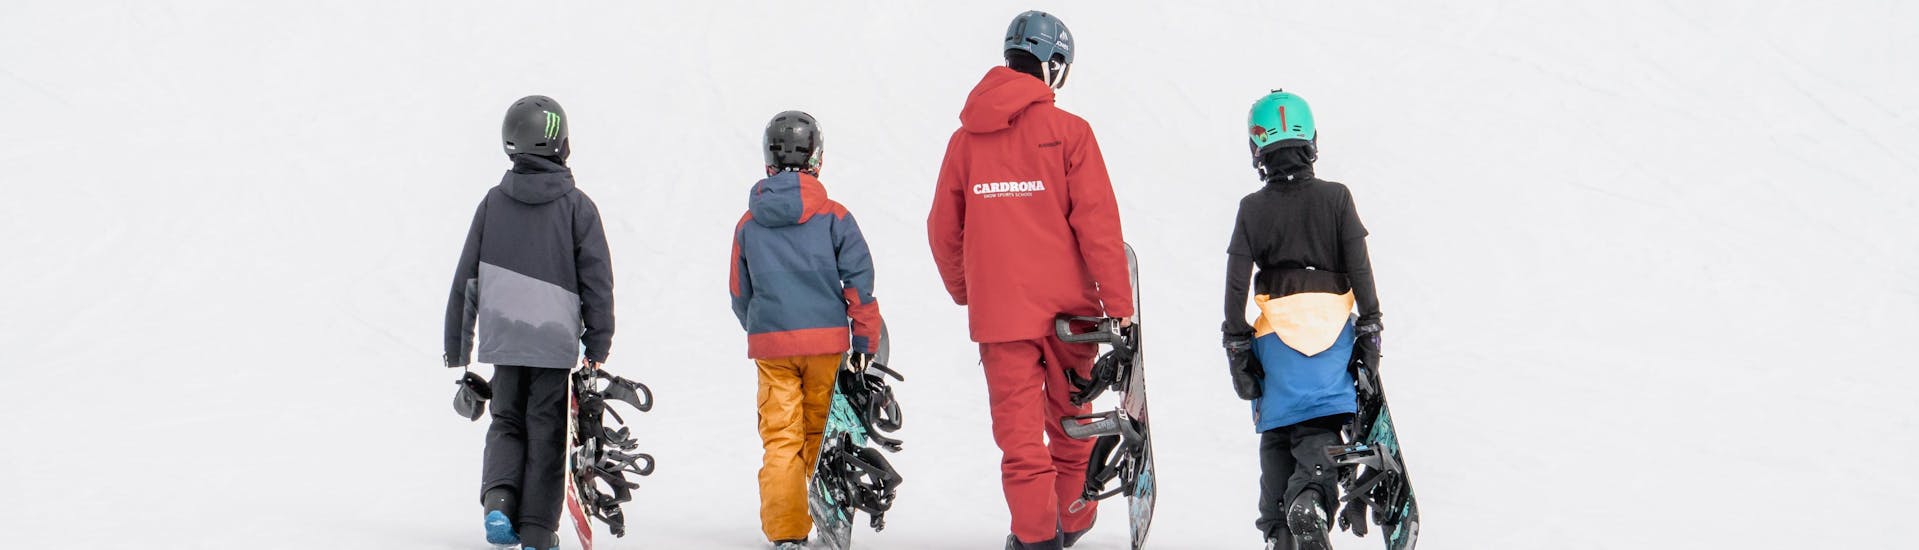 Snowboarding Lessons "Lowriders" (7-14 years) - All Levels.